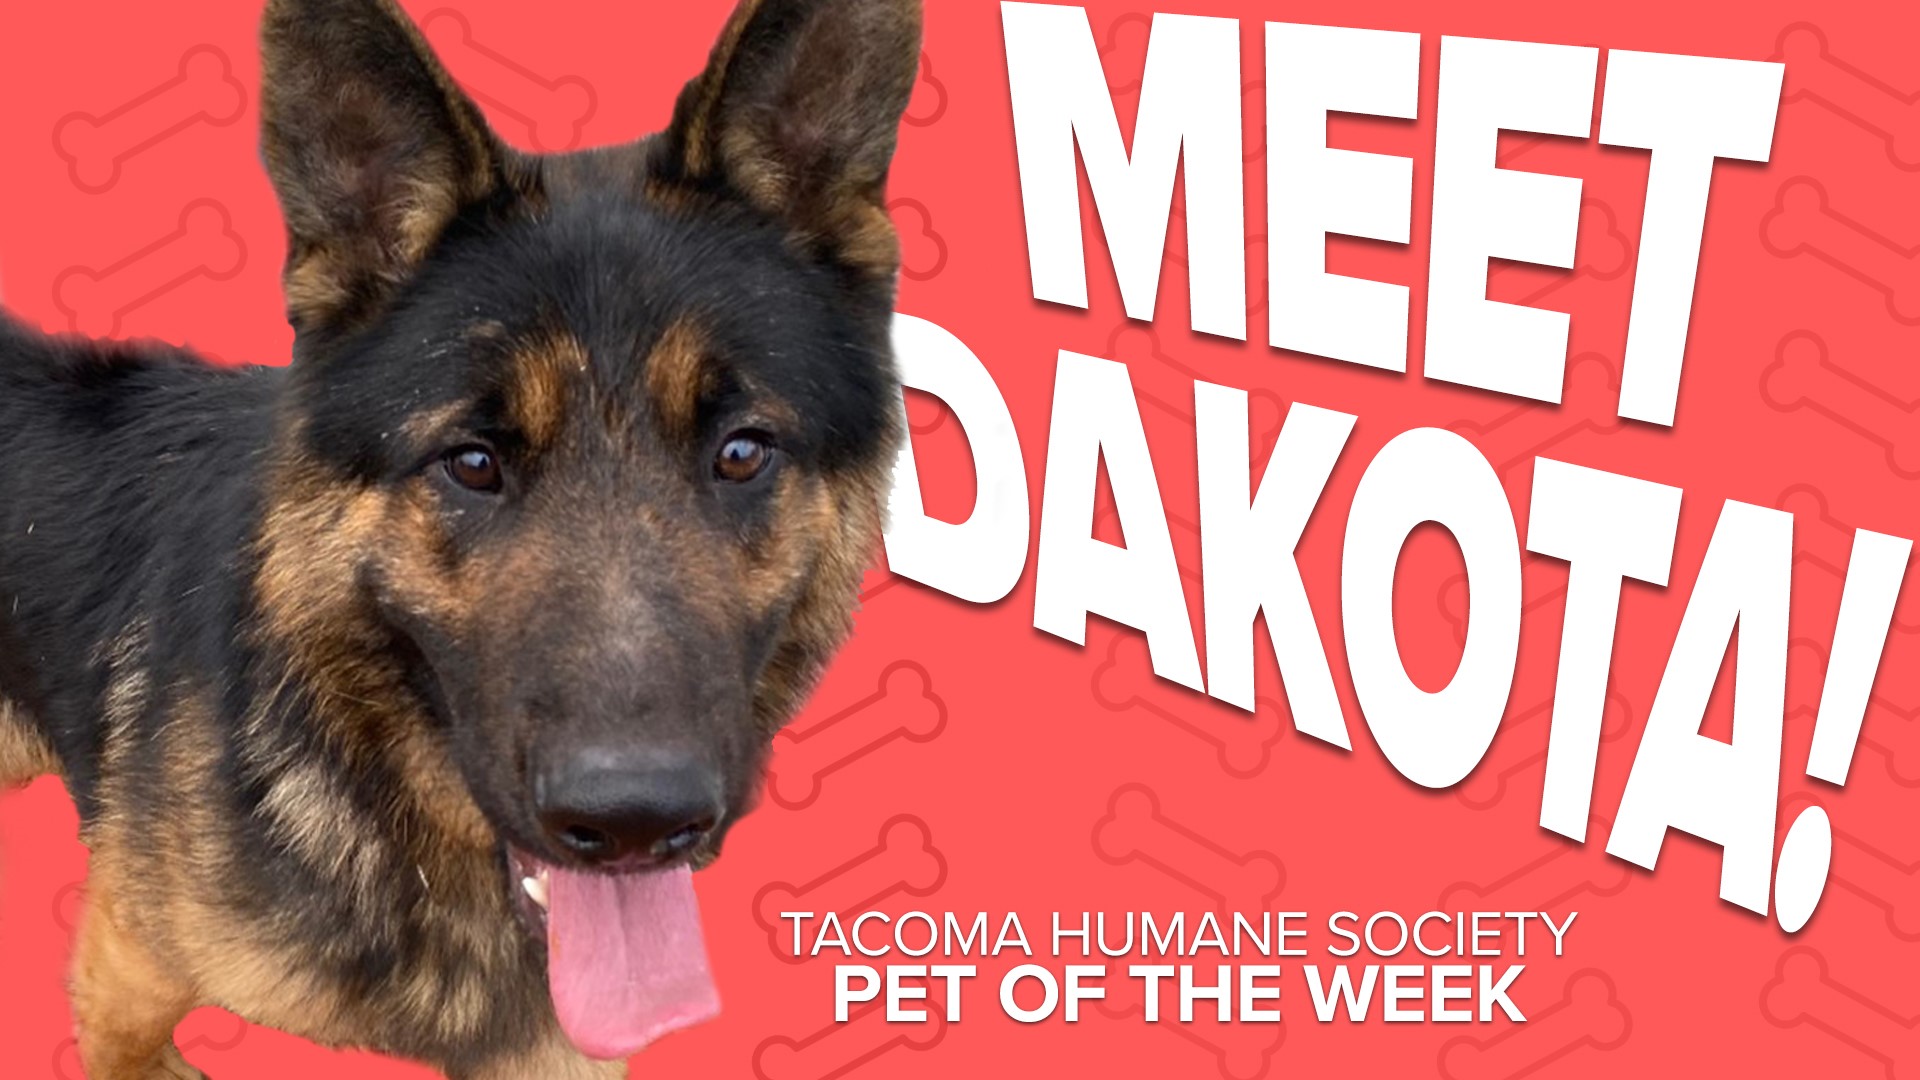 Dakota is a loving, energetic 2-year-old German Shepherd available for adoption at the Tacoma Humane Society.